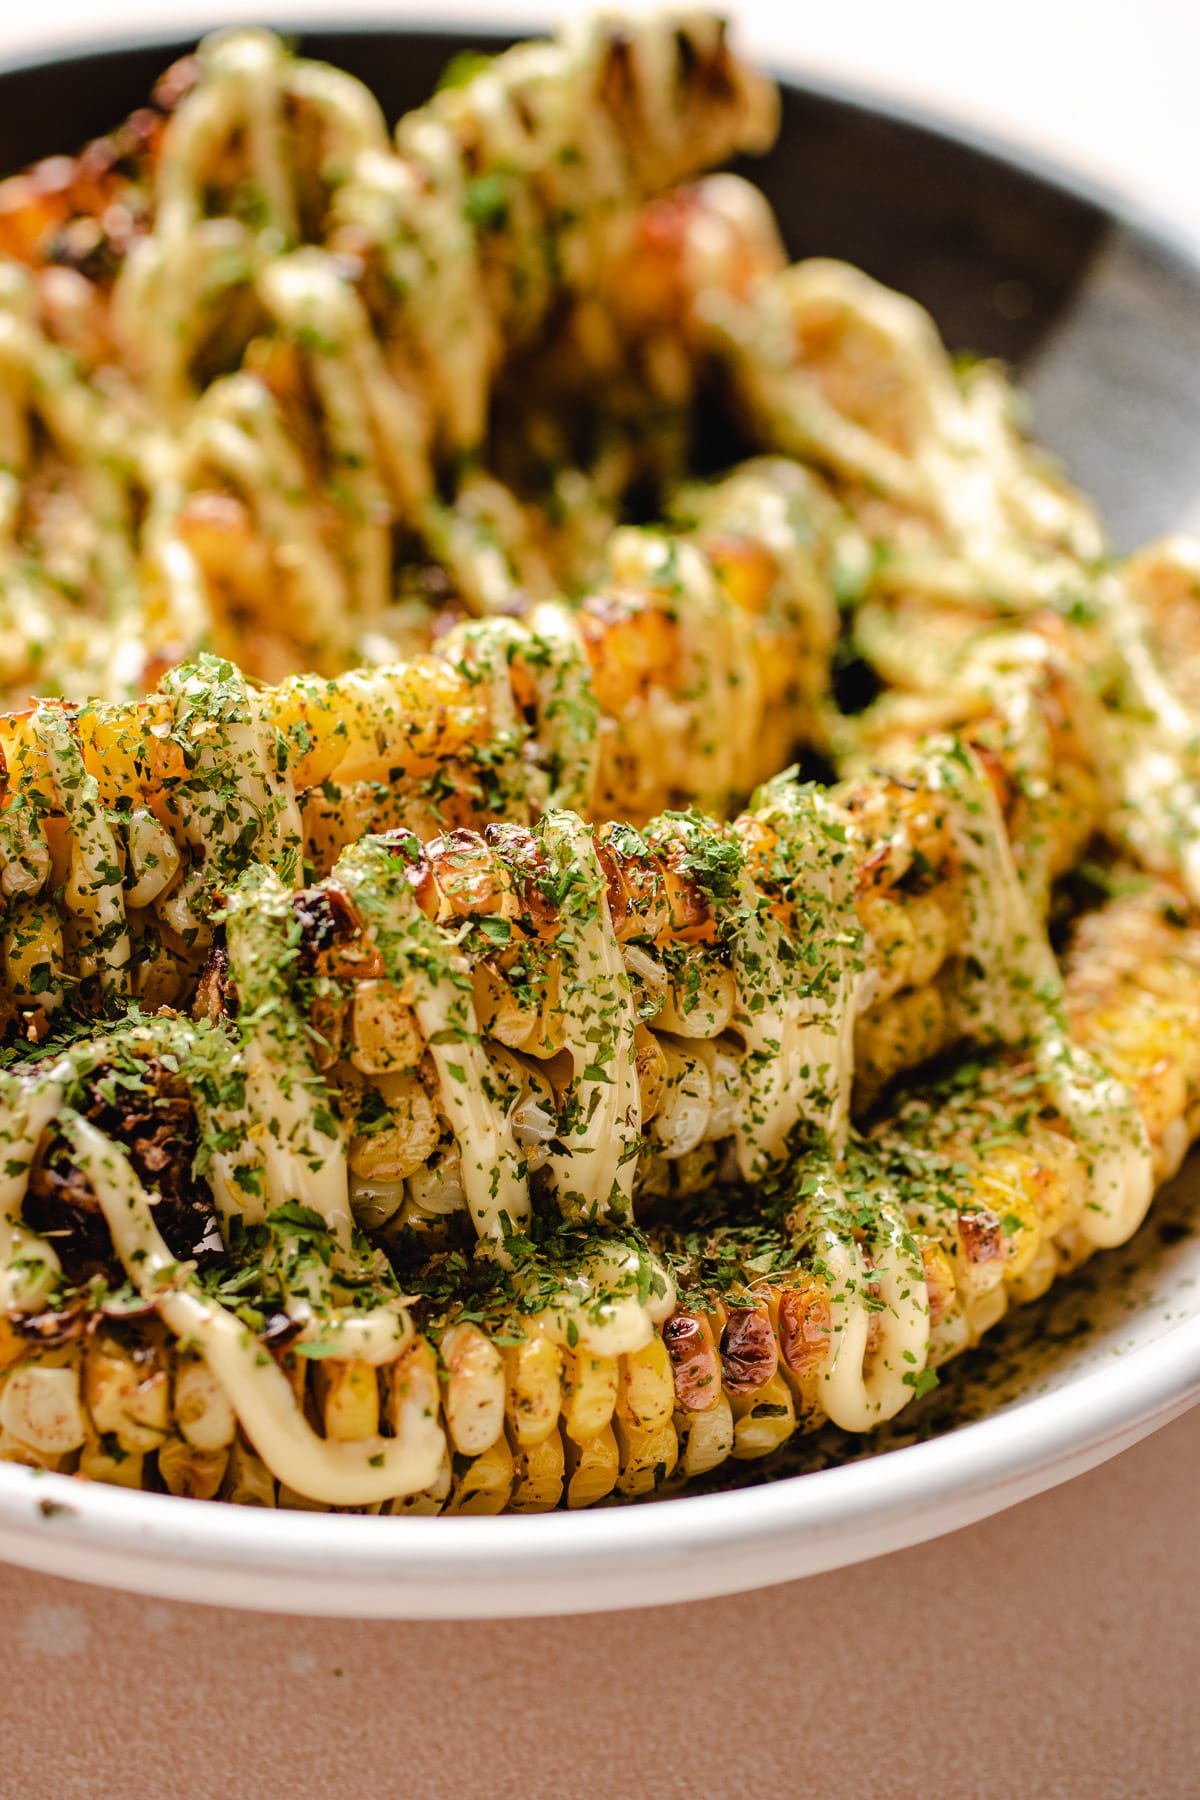 A close shot shows air fryer corn on the cob with mayo over the top